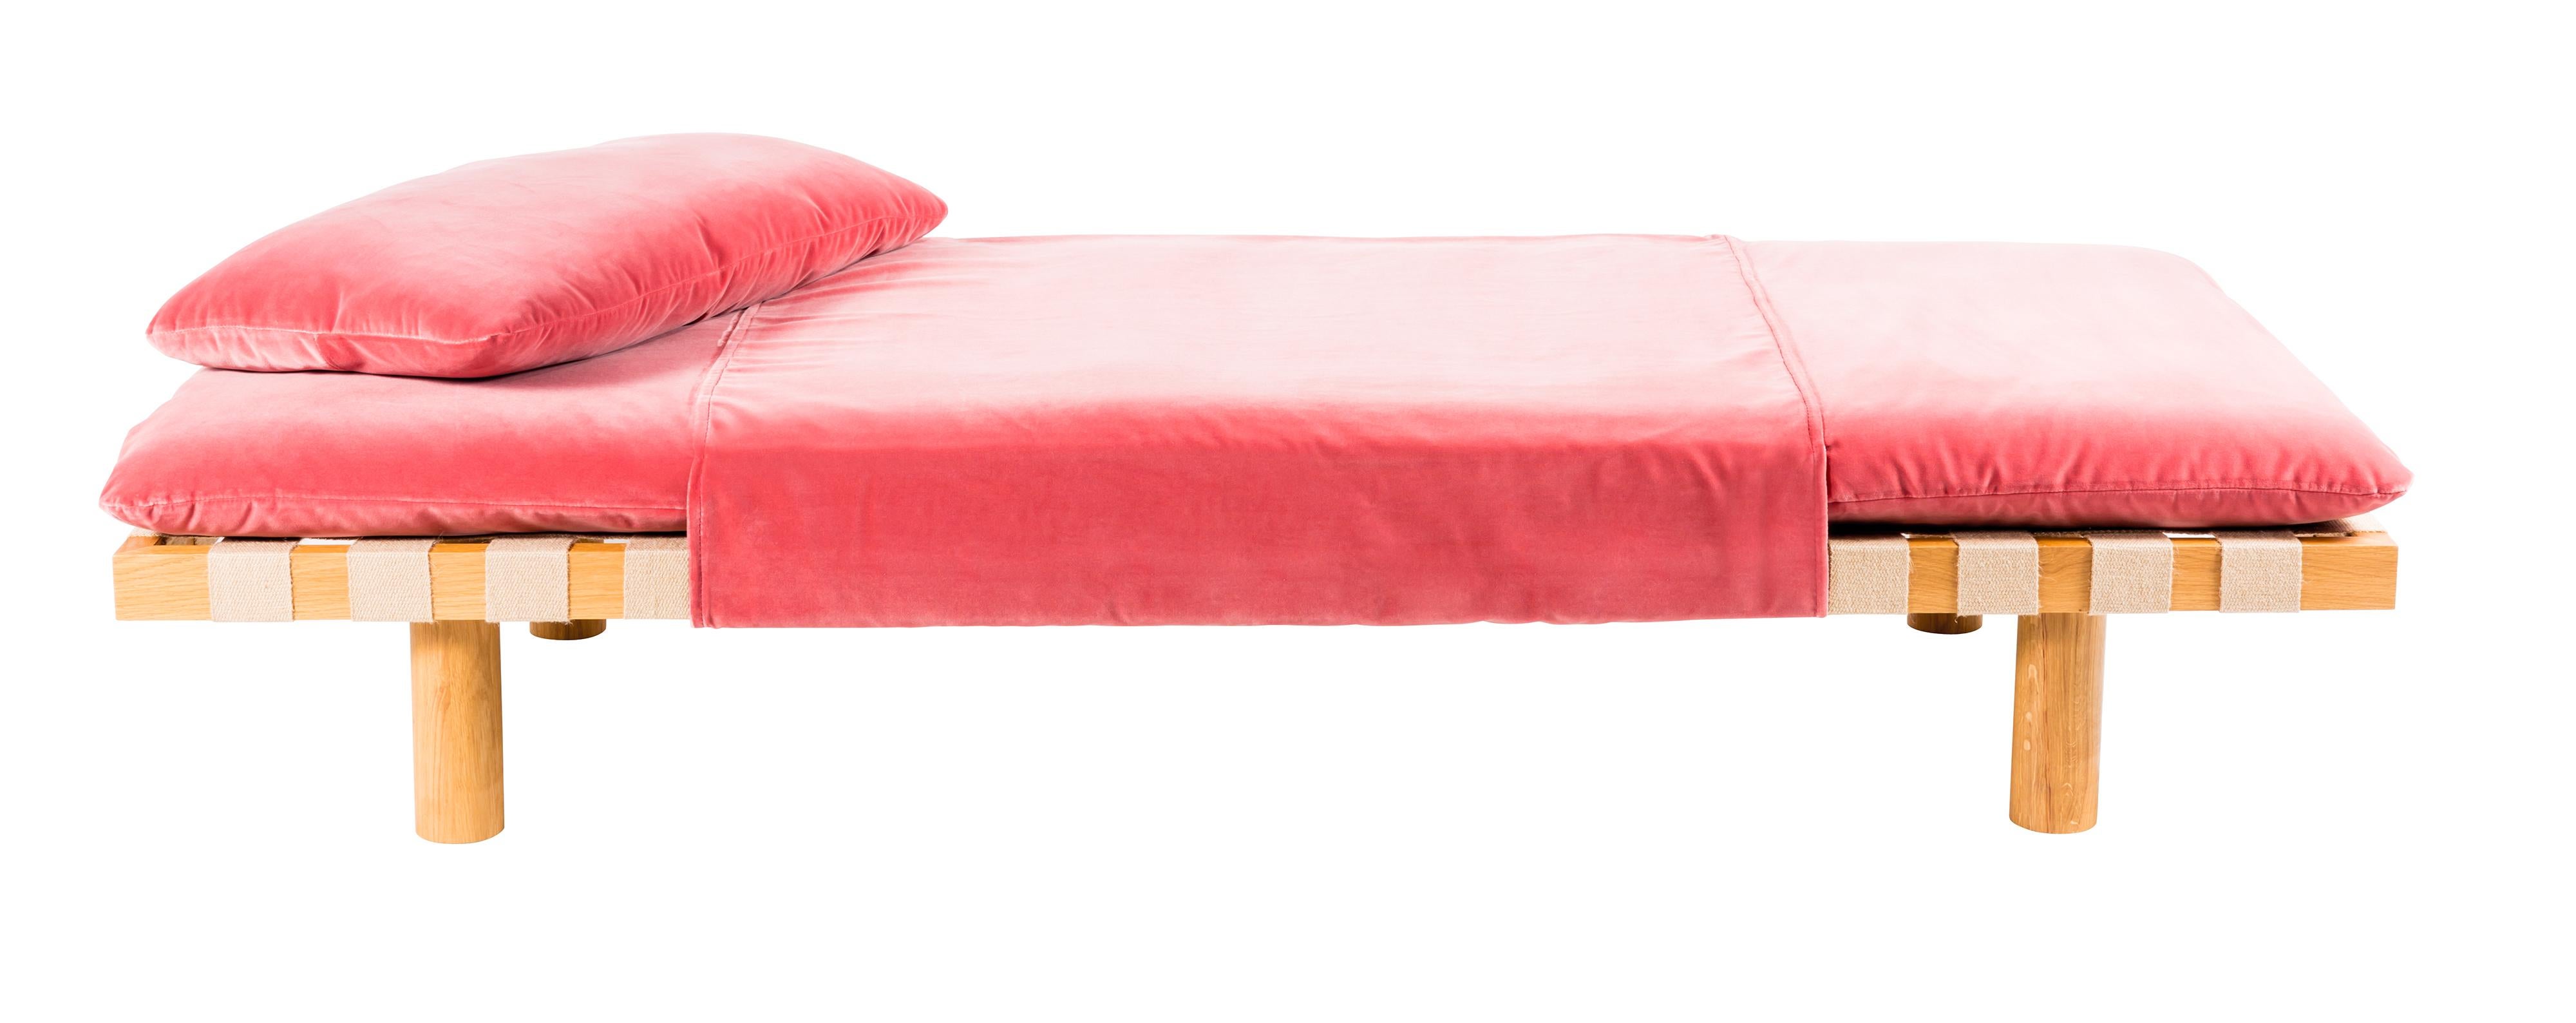 Pallet dirty pink velvet nature day bed by Pulpo
Dimensions: D200 x W80 x H29 cm
Materials: fabric/leather, foam and wood

Also available in different colors and finishes.

Thinking about the first significant furniture for pulpo with the